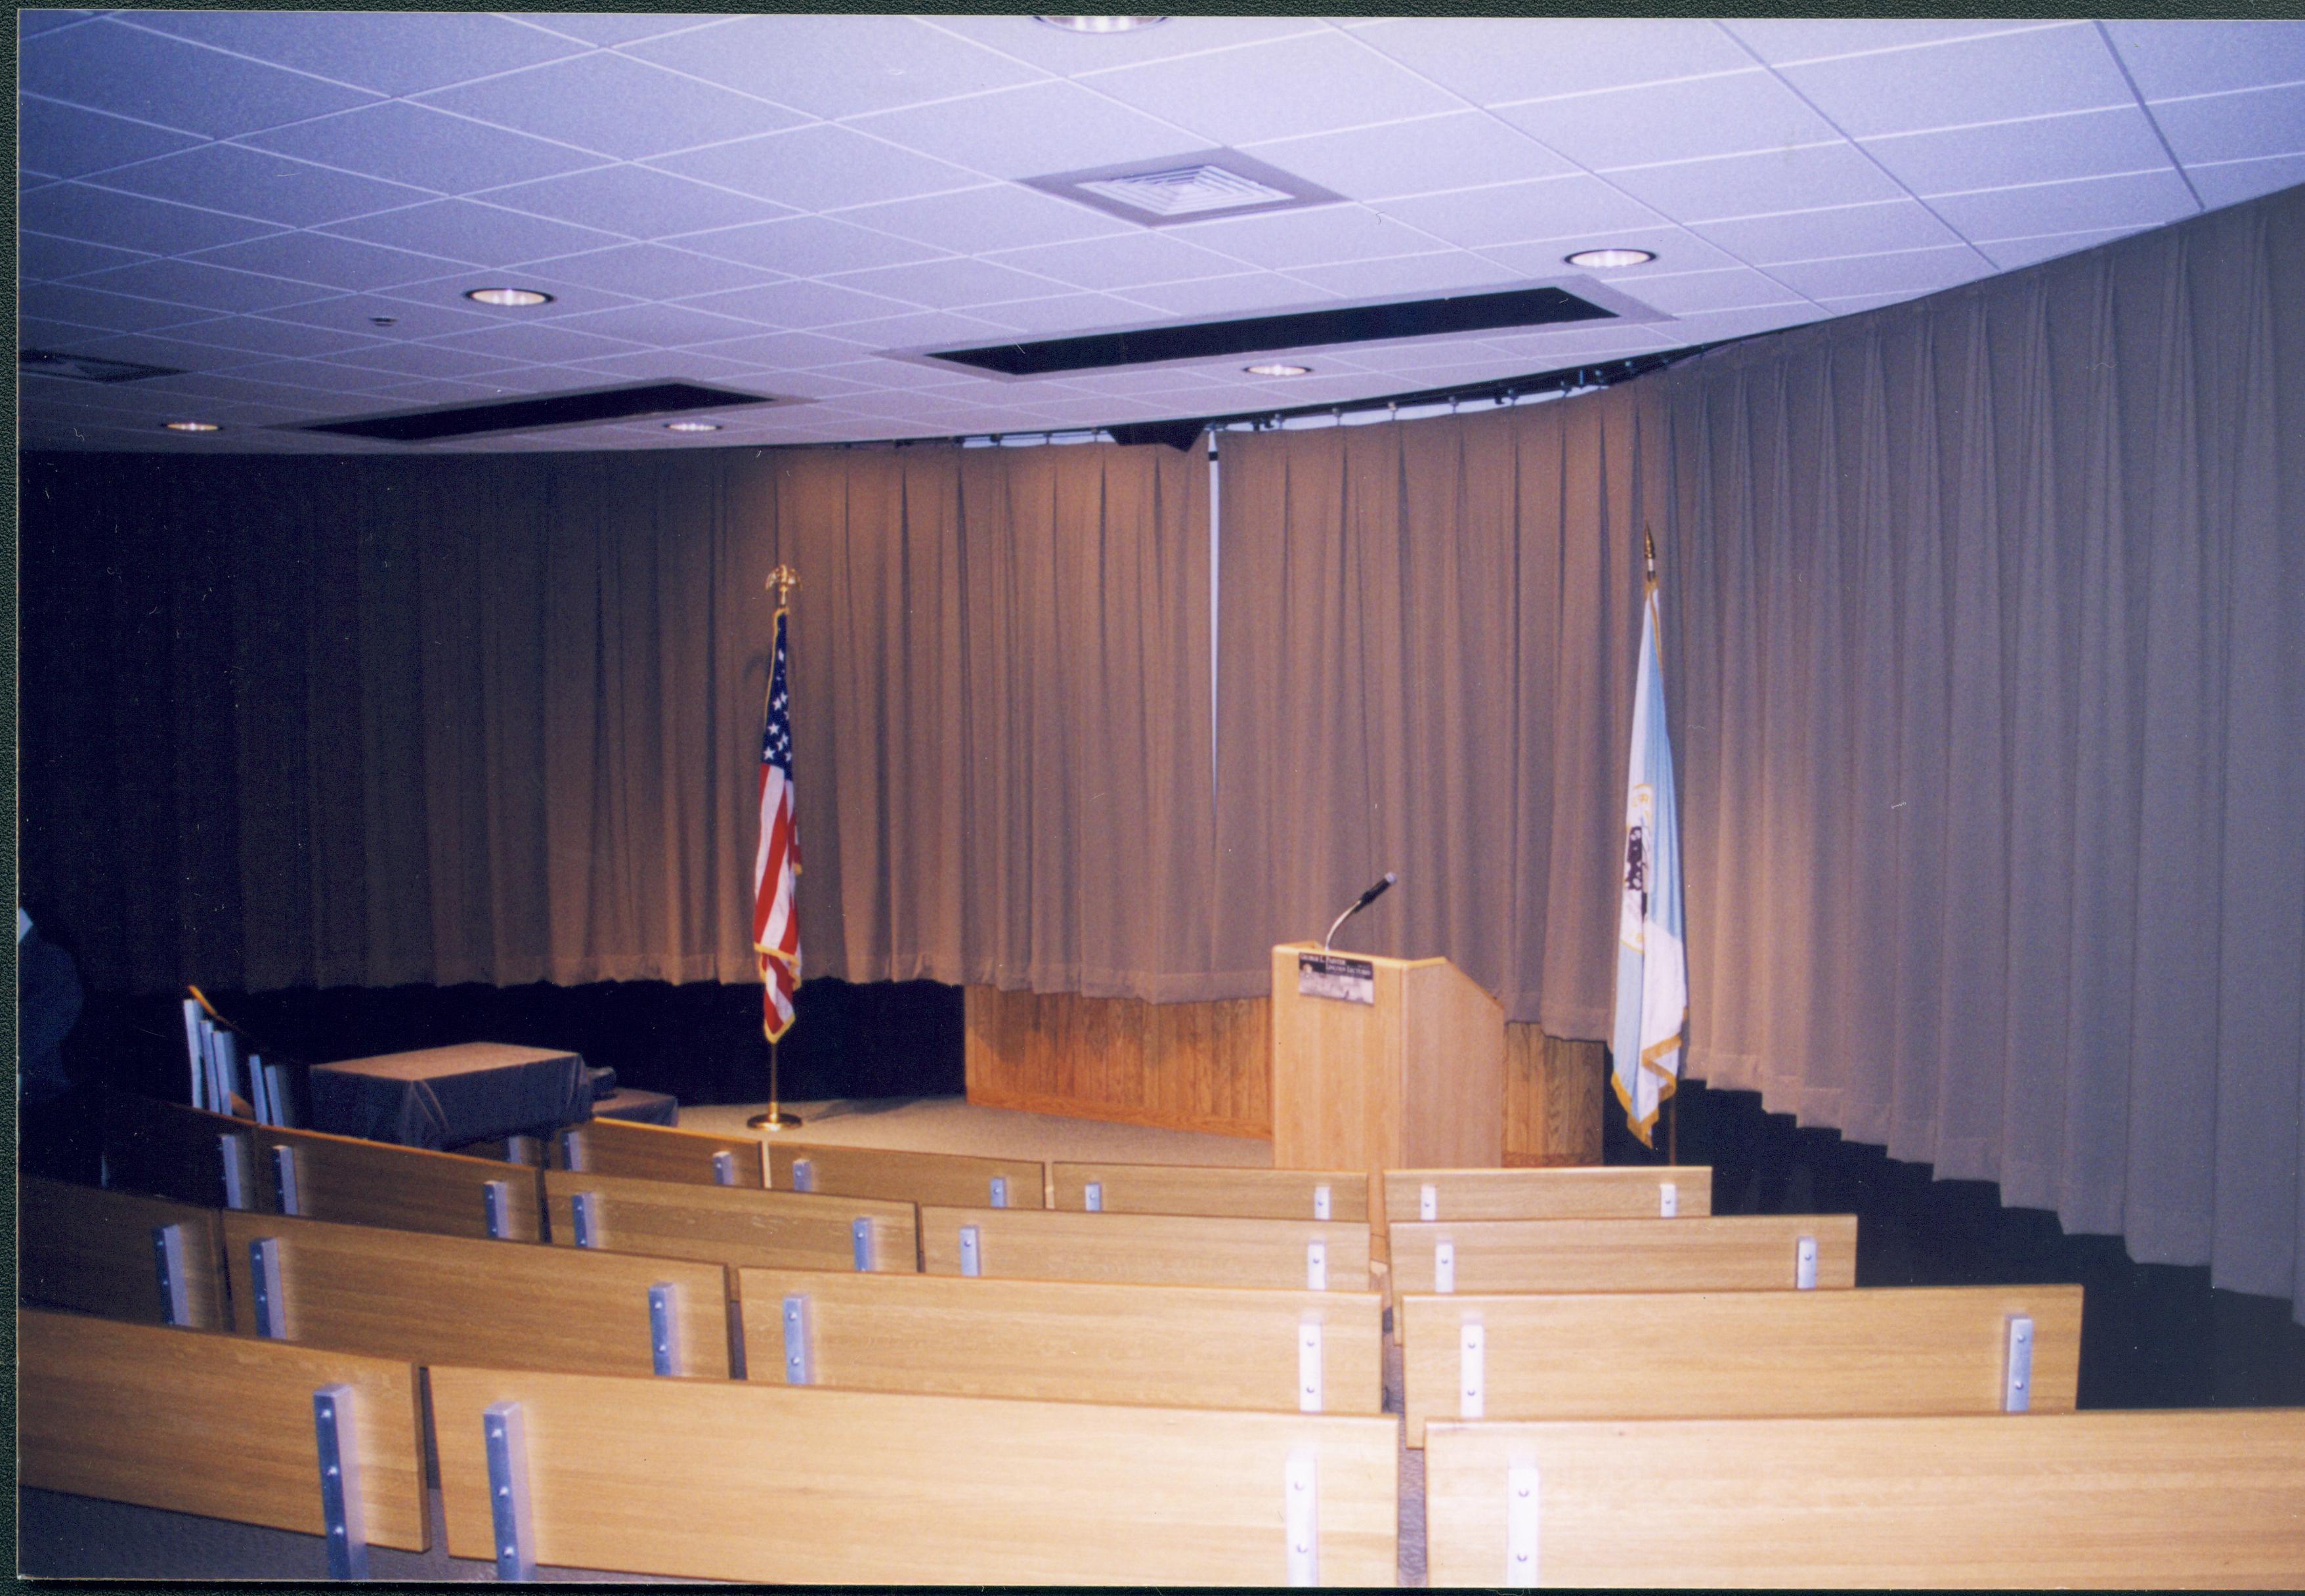 Lincoln's Birthday - Theatre 1 in the Visitor Center set up for lectures including a slide projector set up over top of seats on left and a podium with a special birthday lectures sign in front, flanked by the US flag and a DOI flag.  Looking South from Theater 1 entrance Lincoln's Birthday, Theater 1, Visitor Center, flags, AV setup